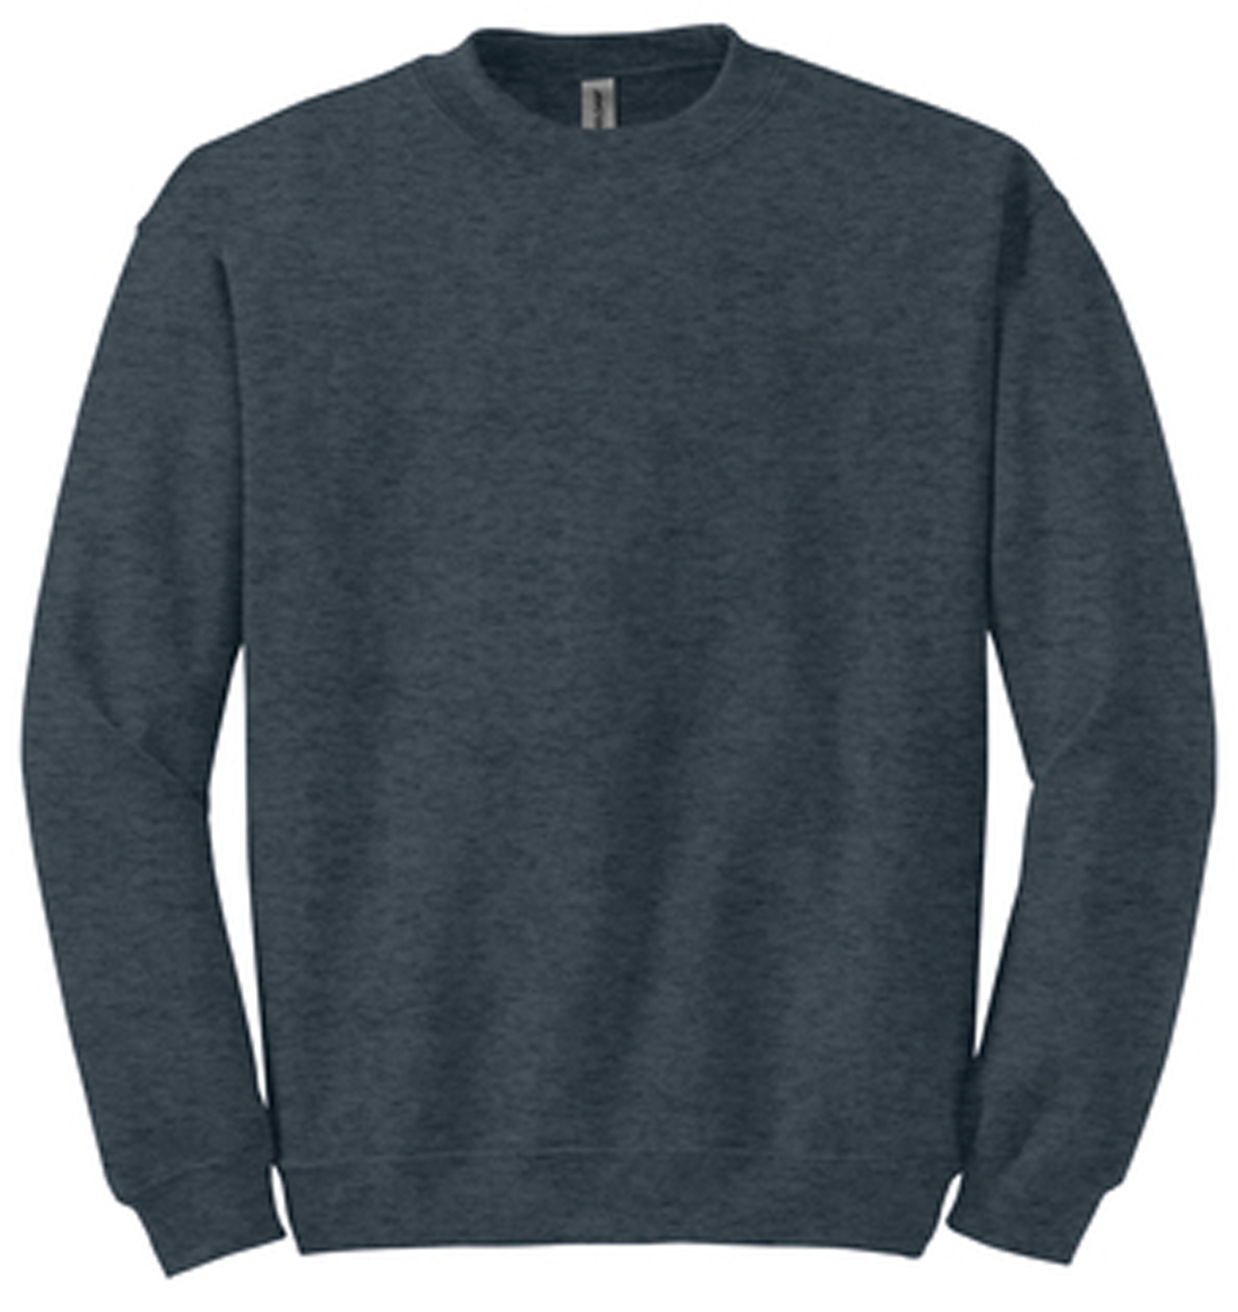 Full Chest Logo - Mary Hill - Integrated Services Crewneck Sweatshirt